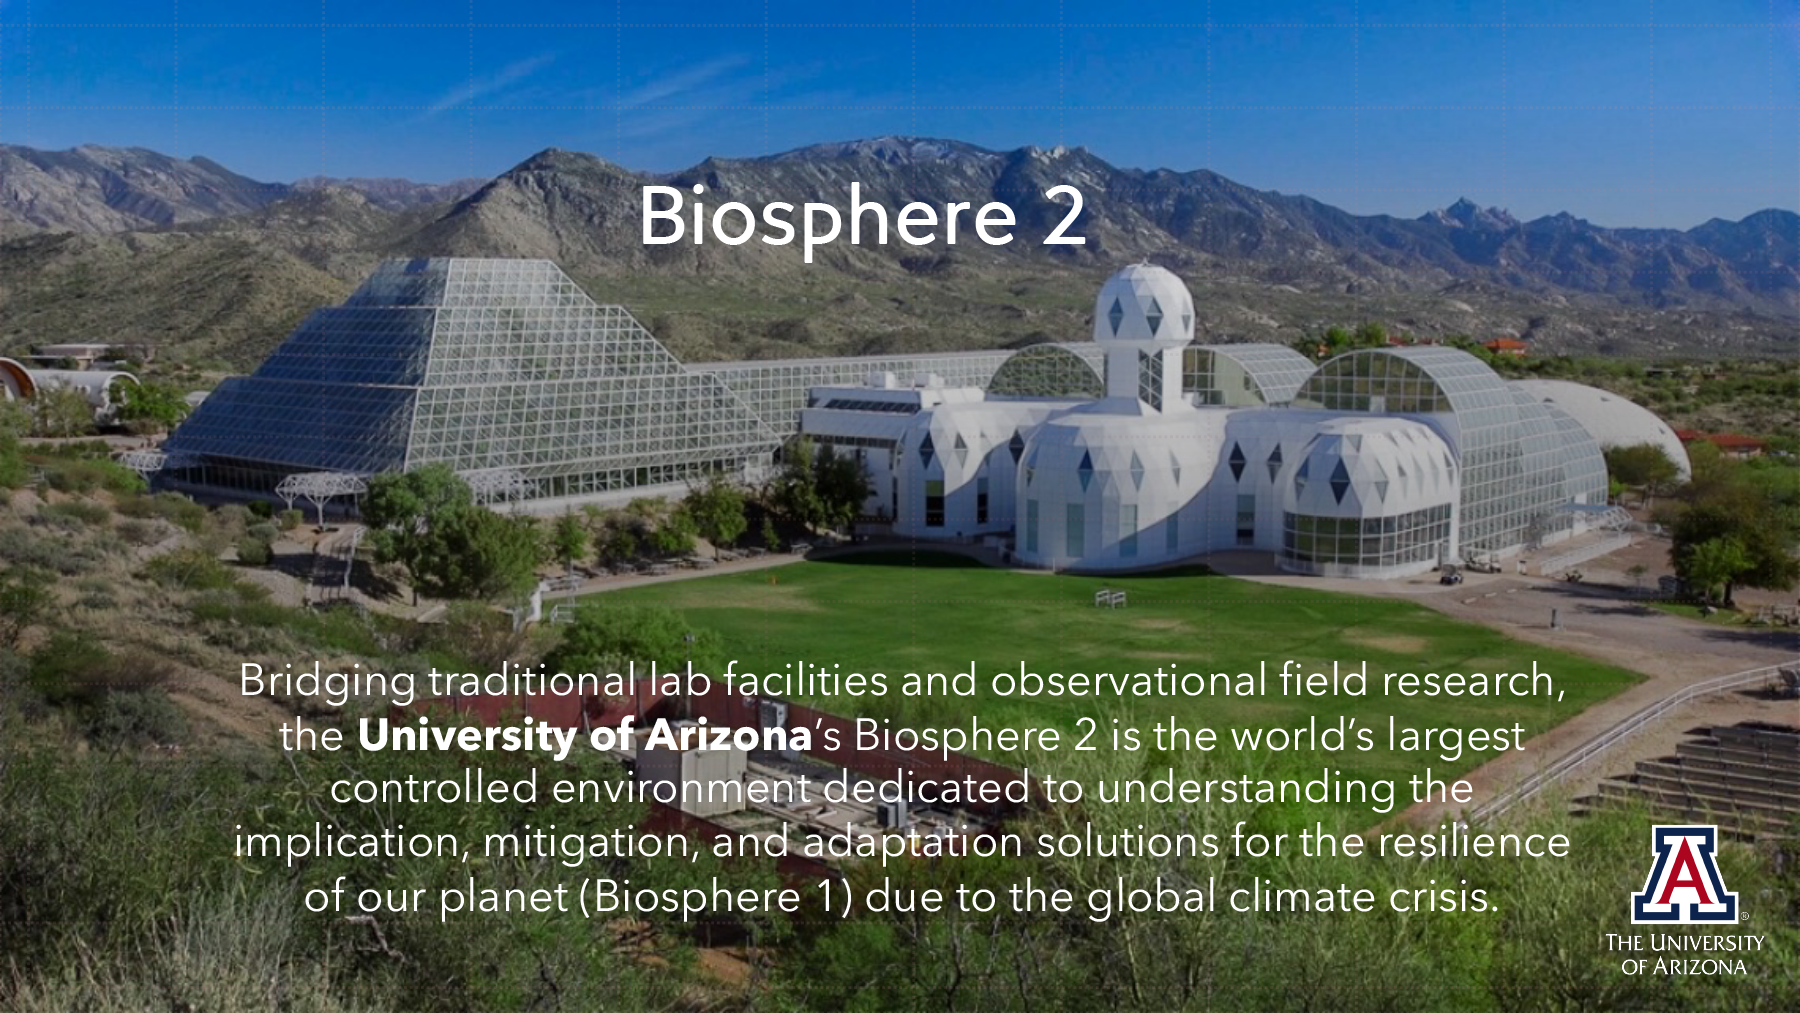 Bridging traditional lab facilities and observational field research, the University of Arizona’s Bi